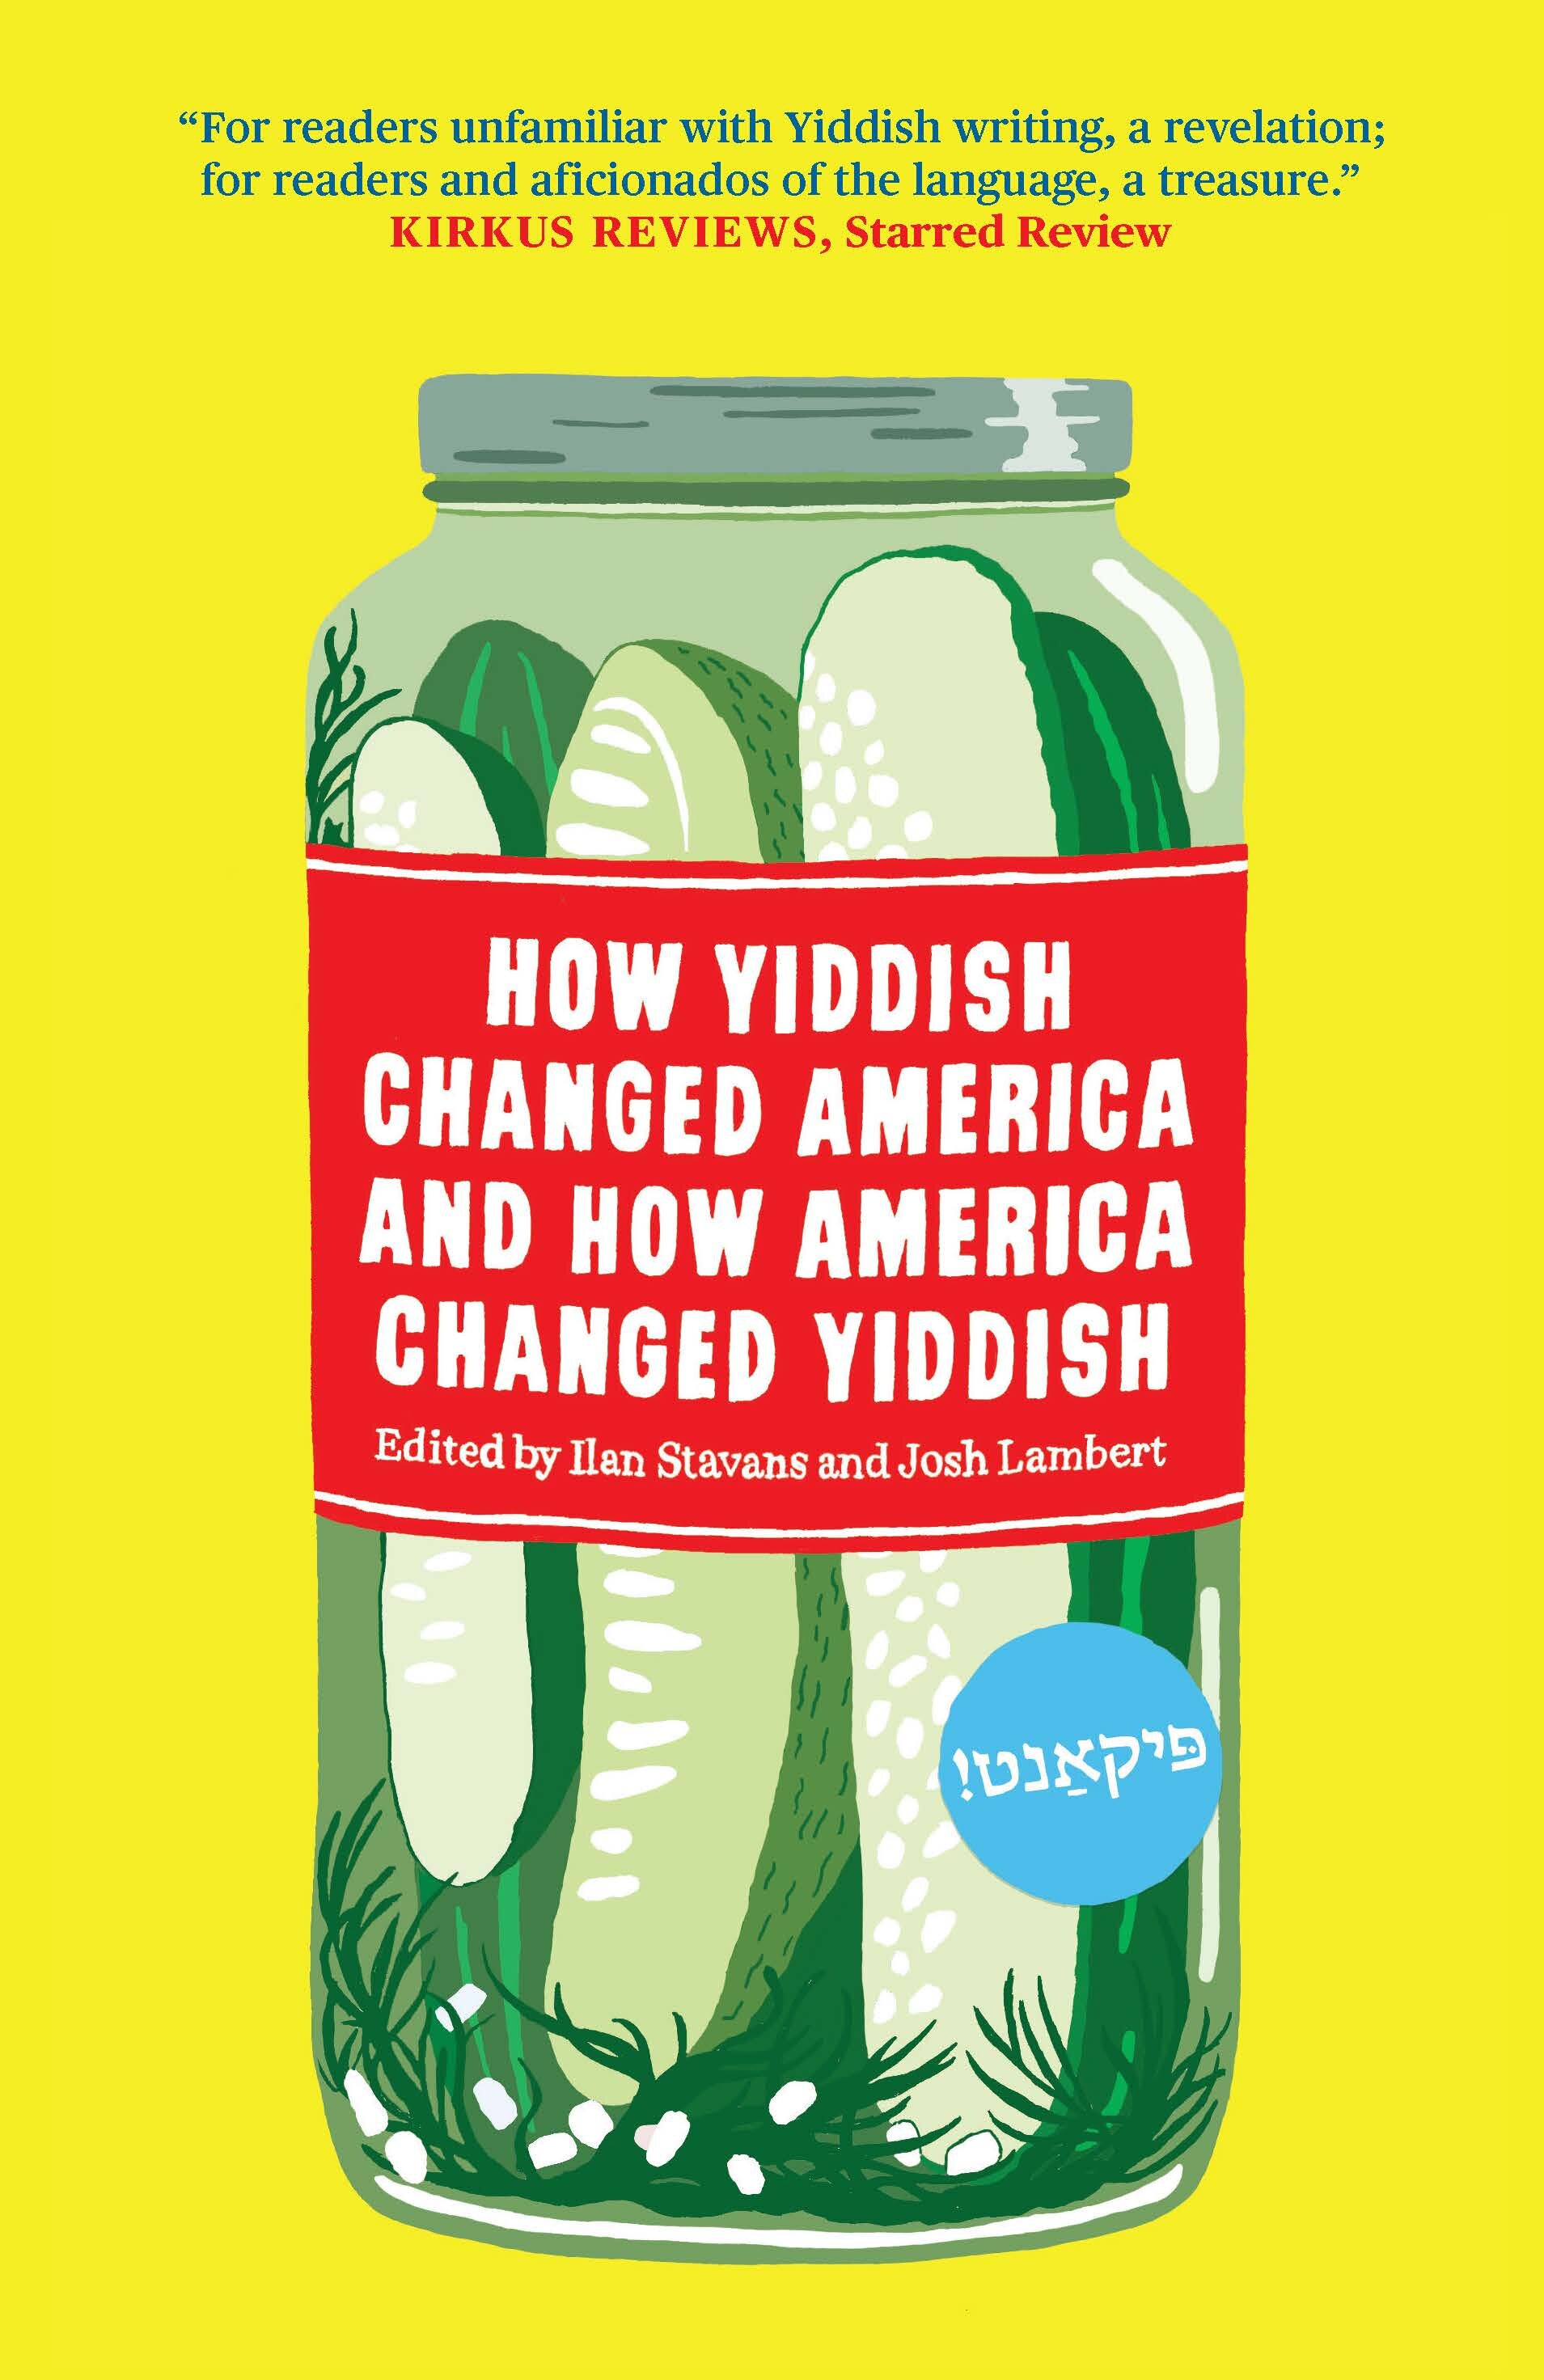 Yiddish+final+front+cover